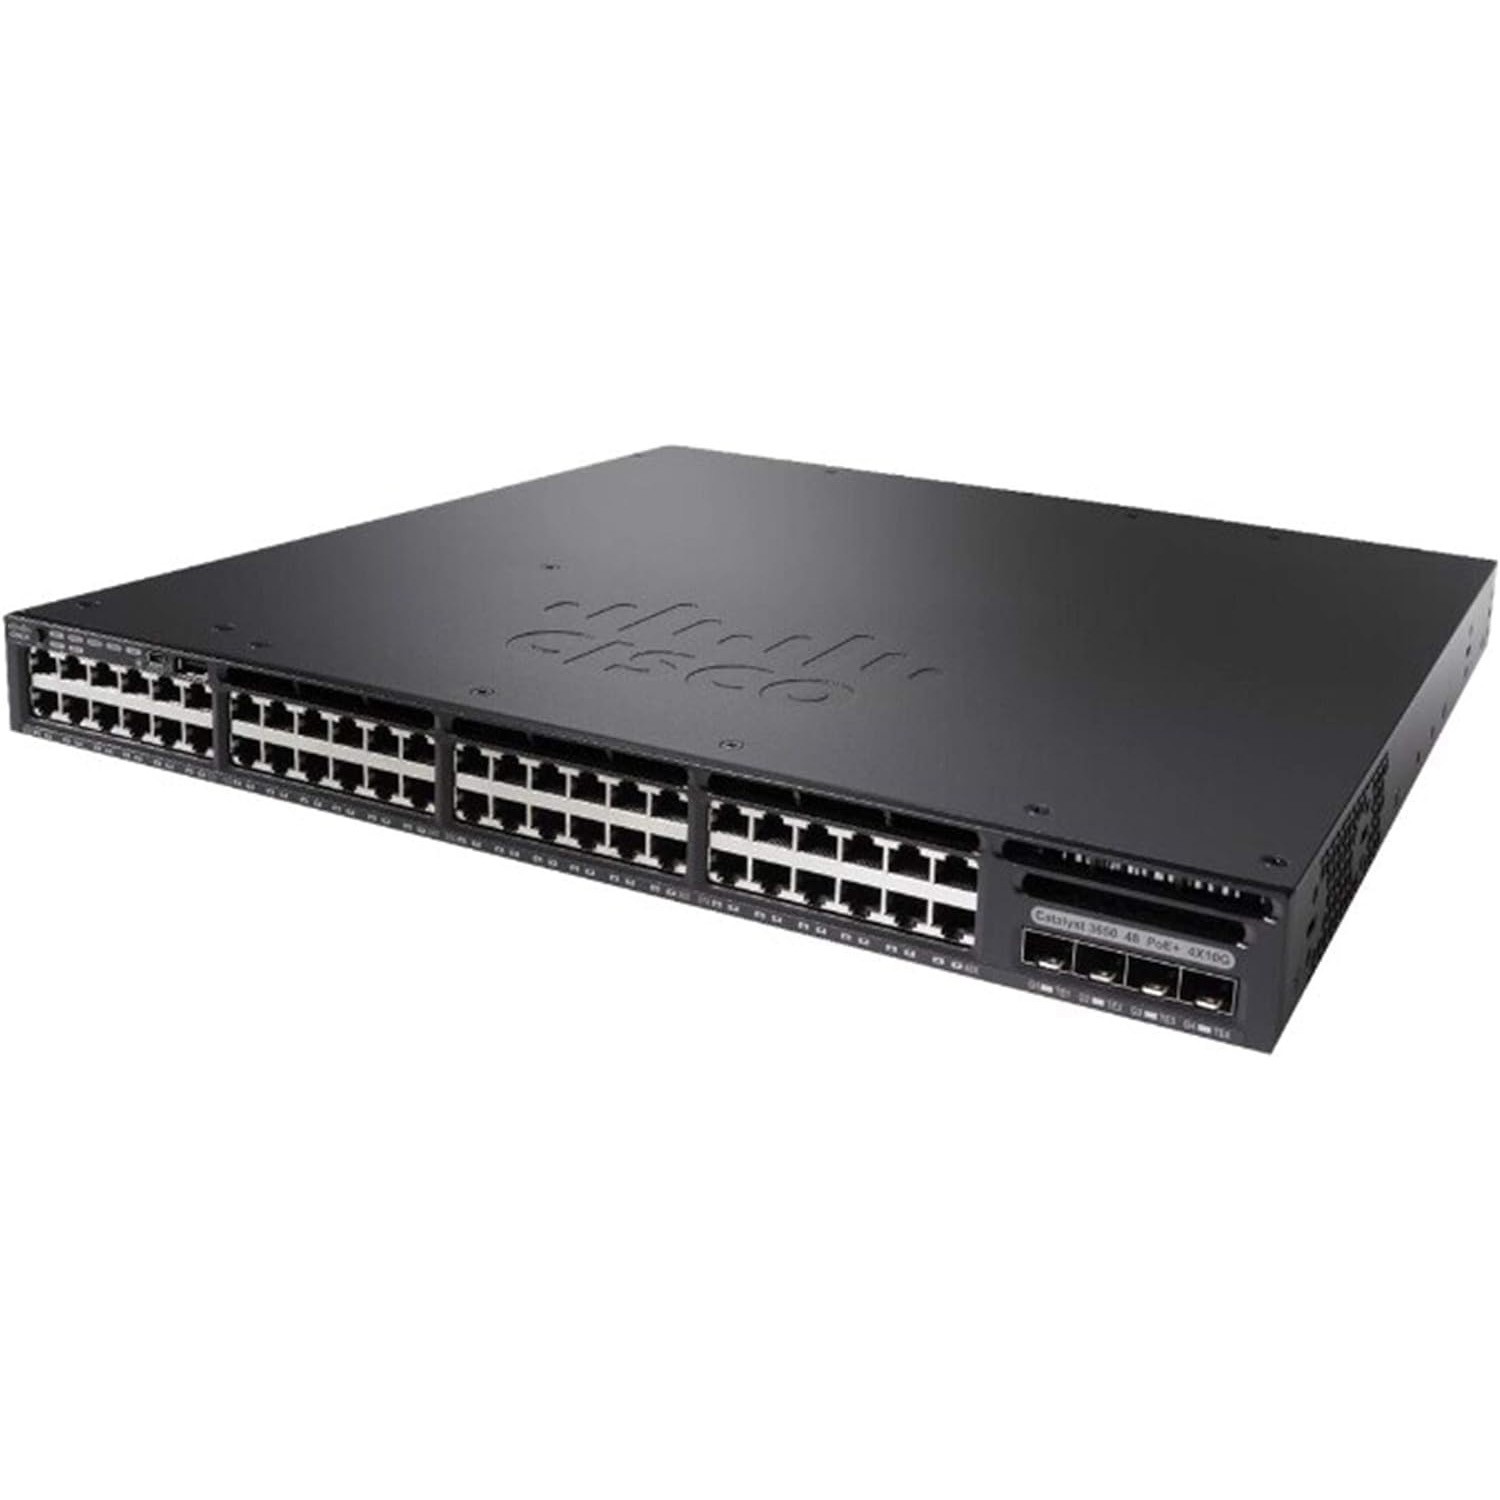 Cisco Catalyst WS-C3650-48PD-L 48xRJ-45 1G PoE+ Managed Switch with 2xC3650 Stack